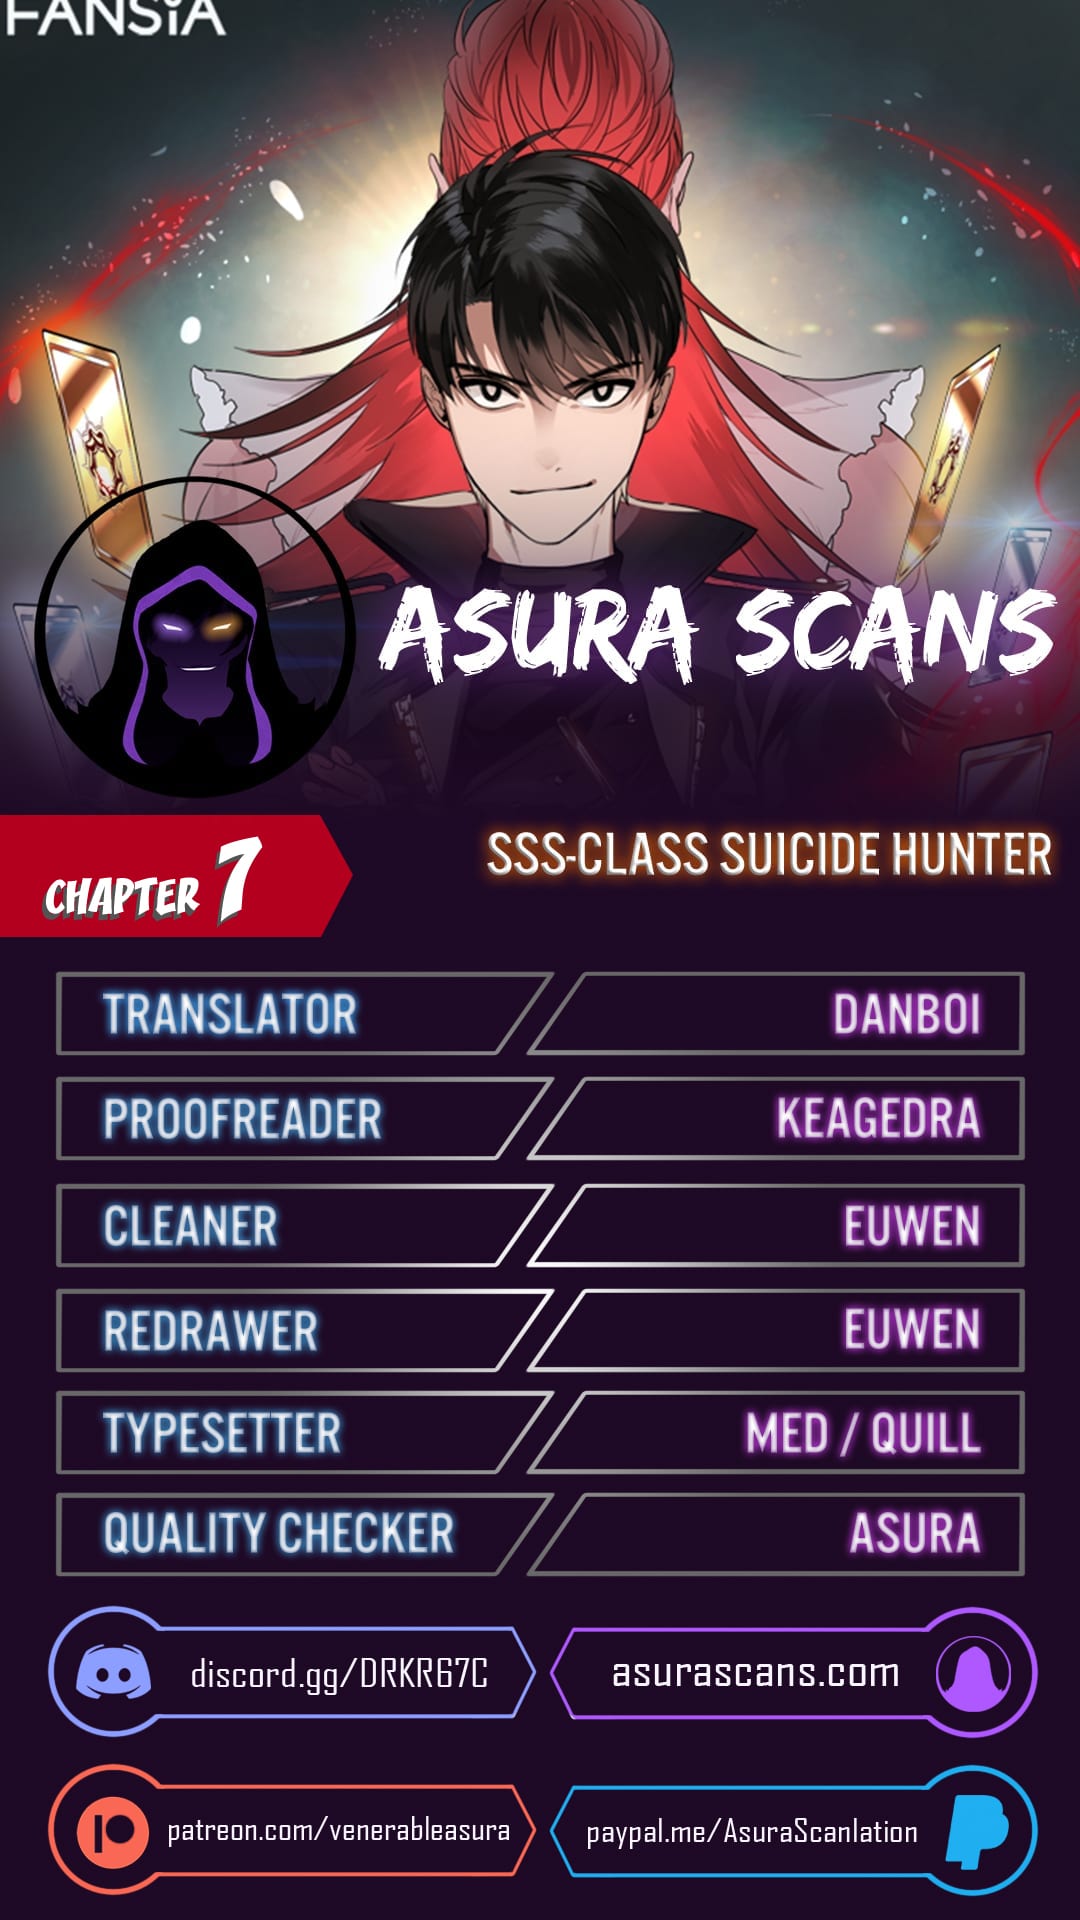 SSS-Class Suicide Hunter chapter 7